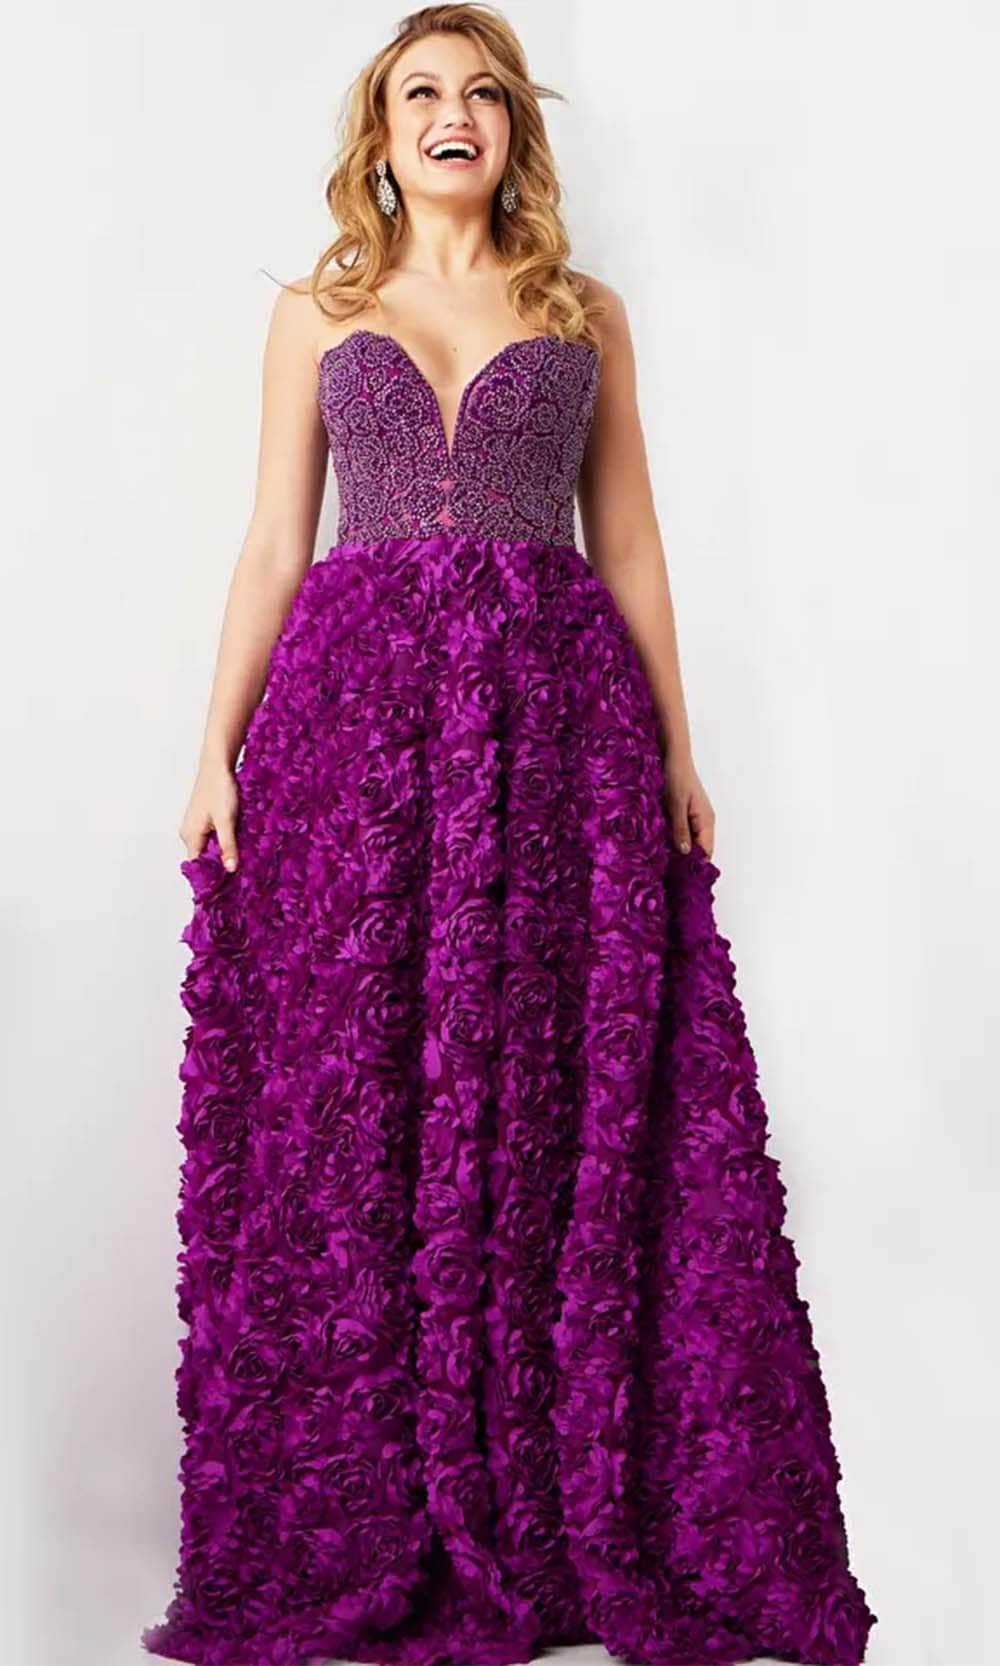 Image of Jovani 38318 - Beaded 3D Floral Embellished Prom Gown